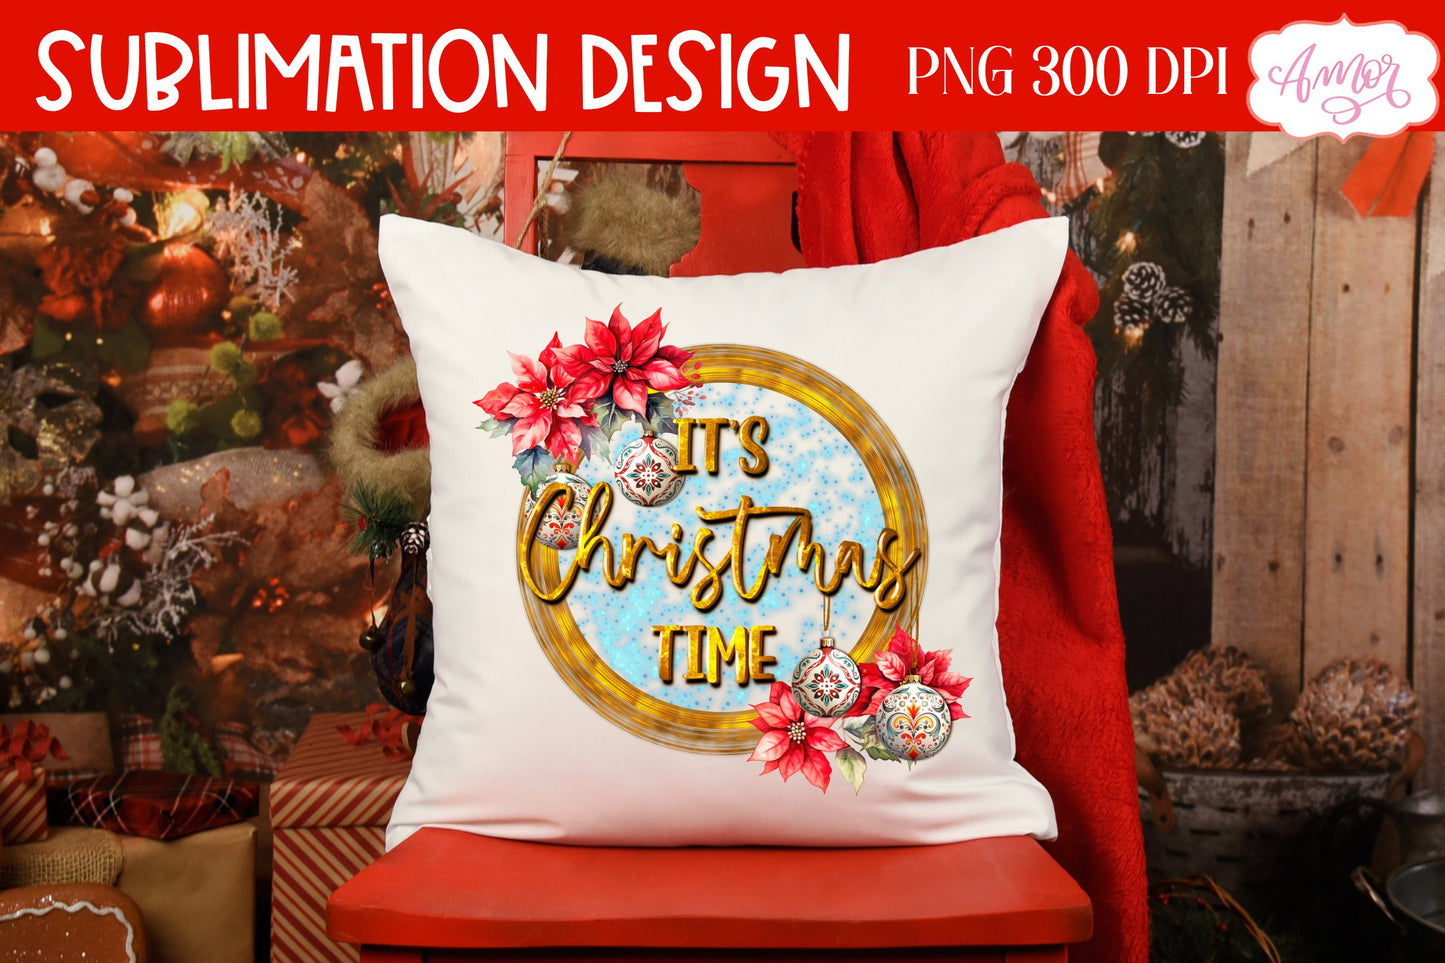 It's Christmas time PNG design for sublimation